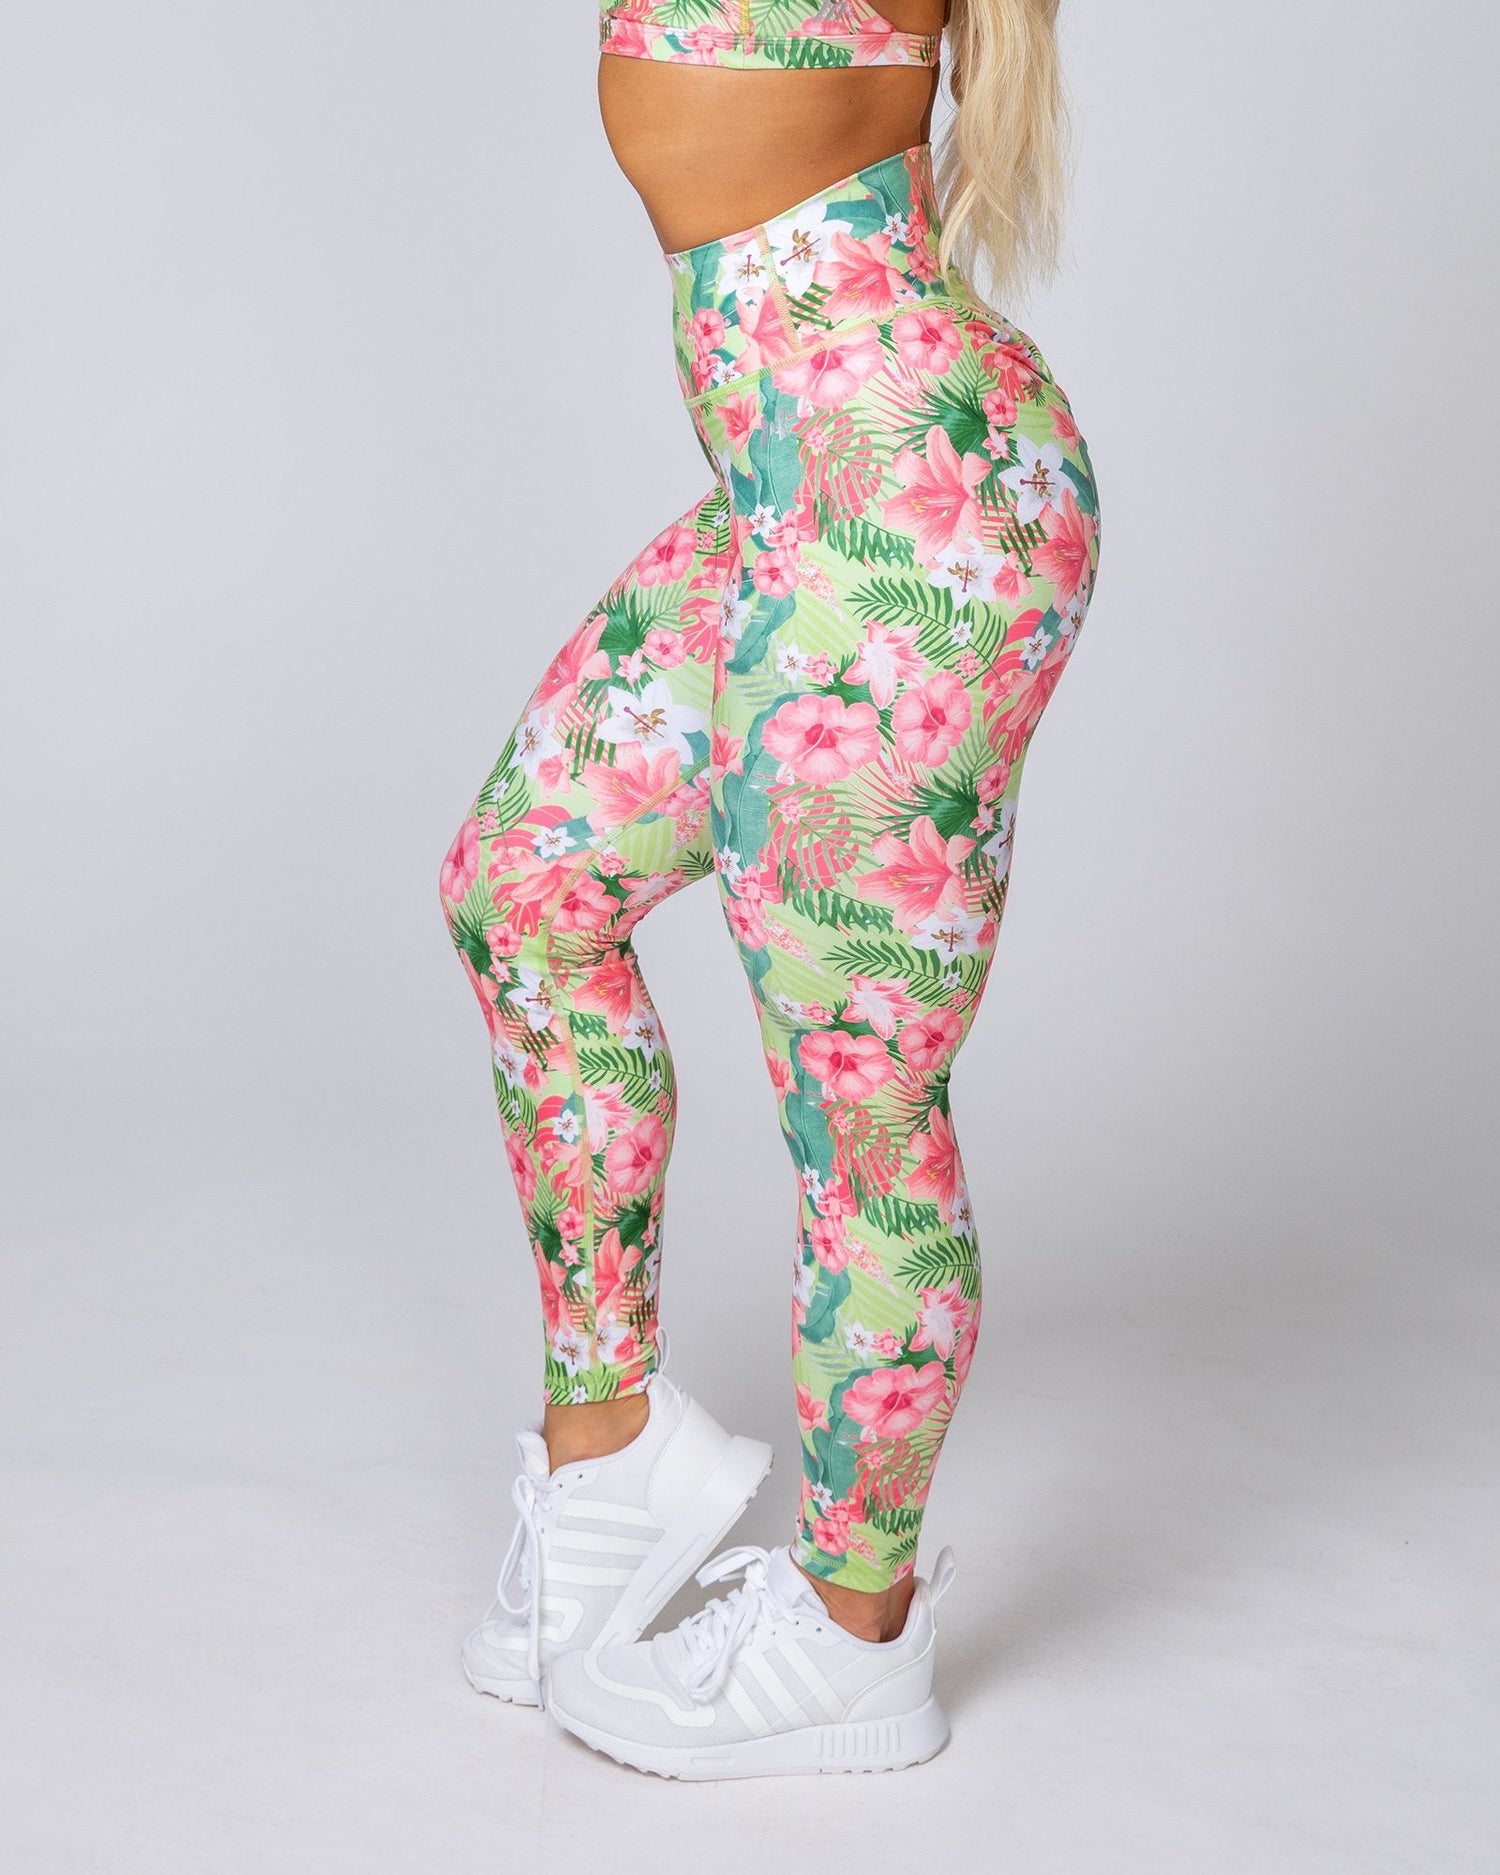 Women's leggings shaping dance and fitness with a wide waist Flowers